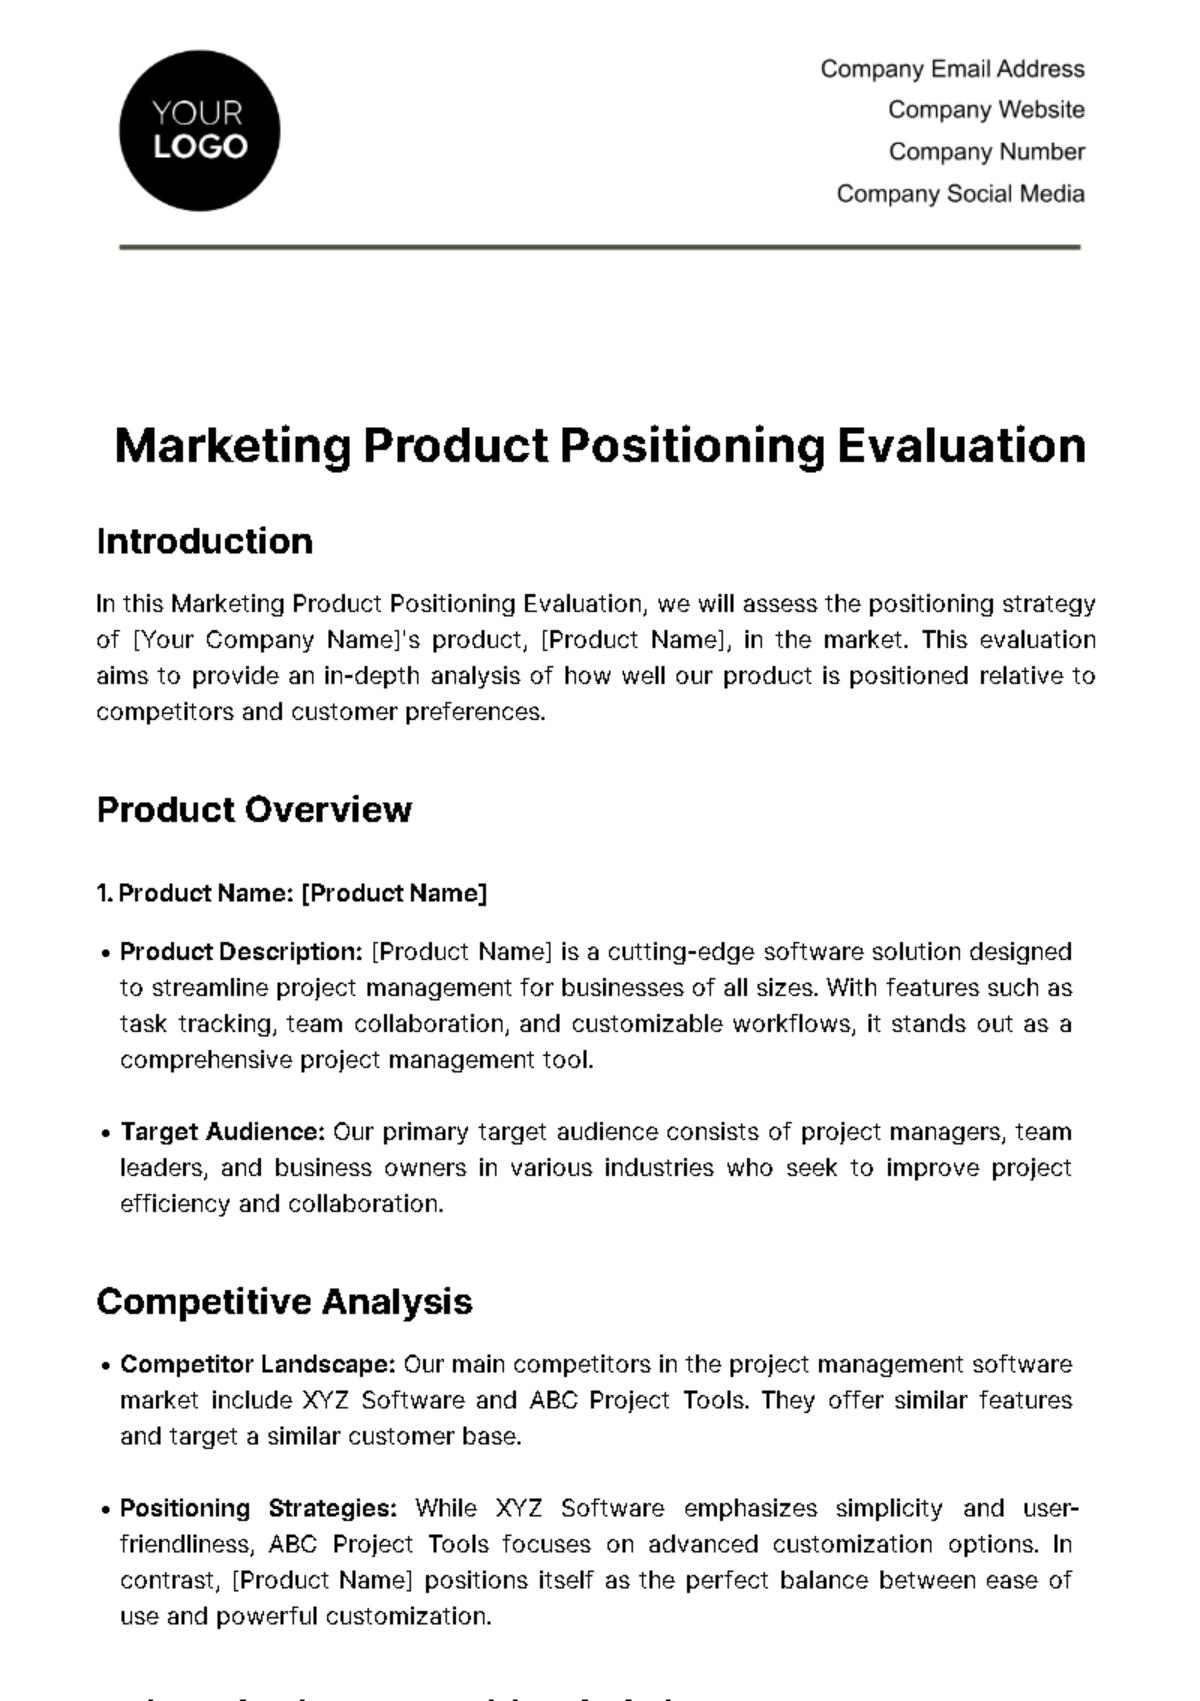 Free Marketing Product Positioning Evaluation Template